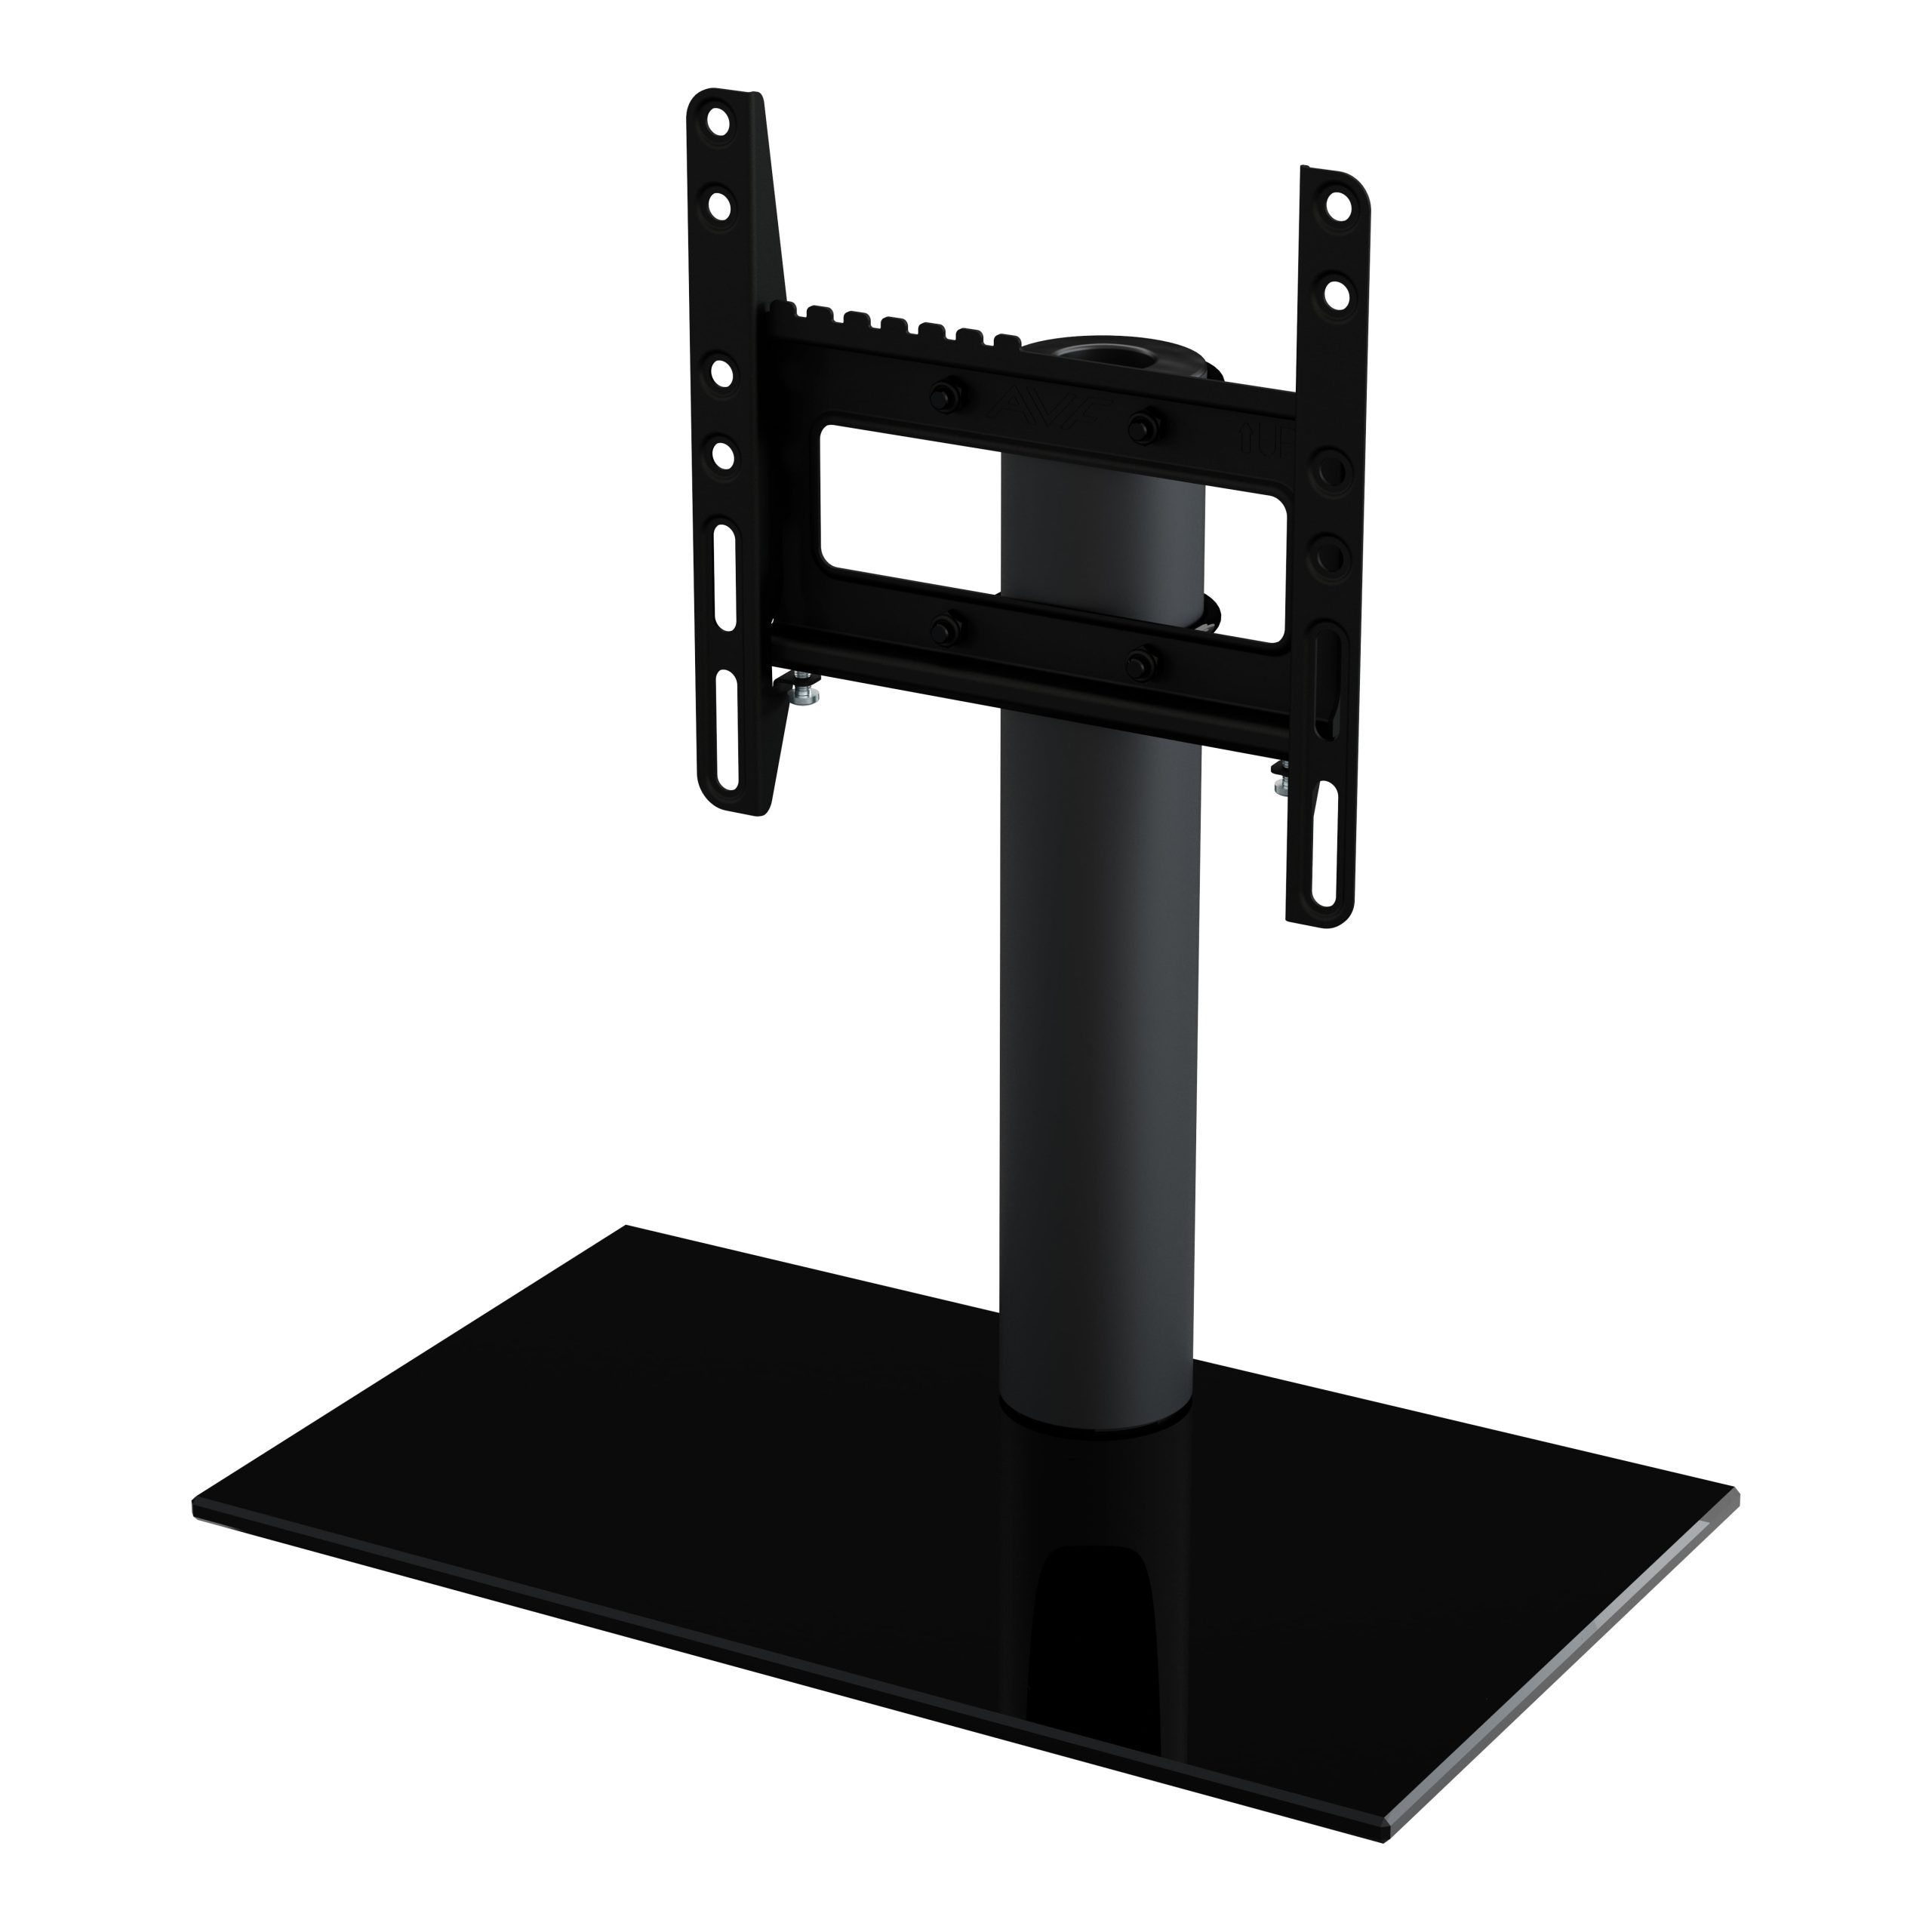 Avf B200bb A Universal Table Top Tv Stand / Tv Base – Fixed Position Within Universal Tabletop Tv Stands (Gallery 1 of 20)